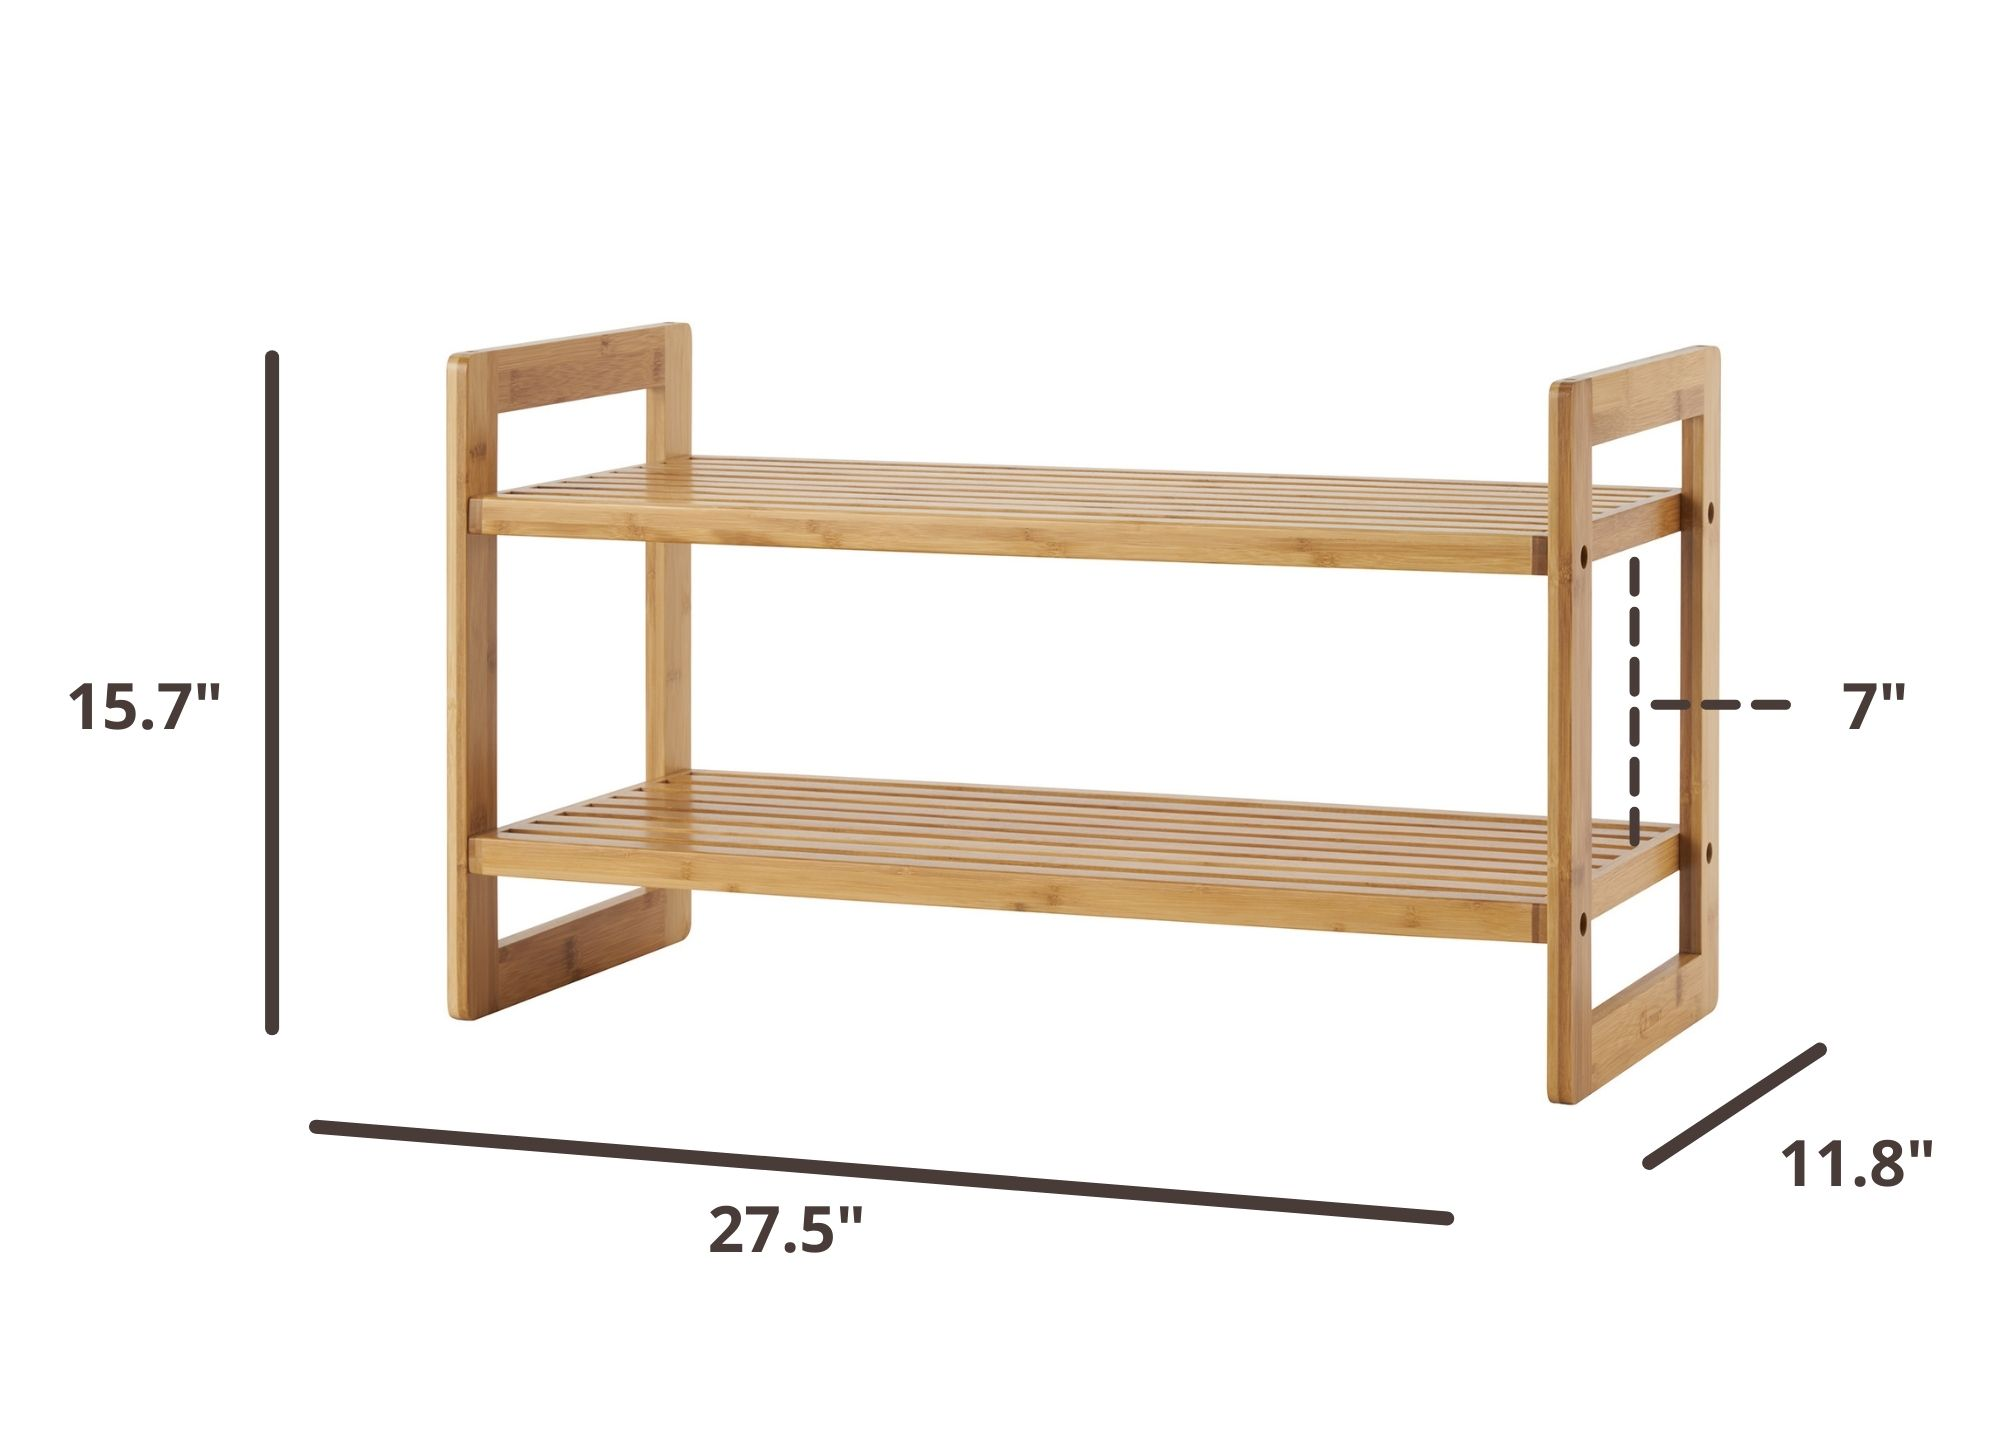 15.7 inches tall by 27.5 inches wide by 11.8 inches deep bamboo shoe rack